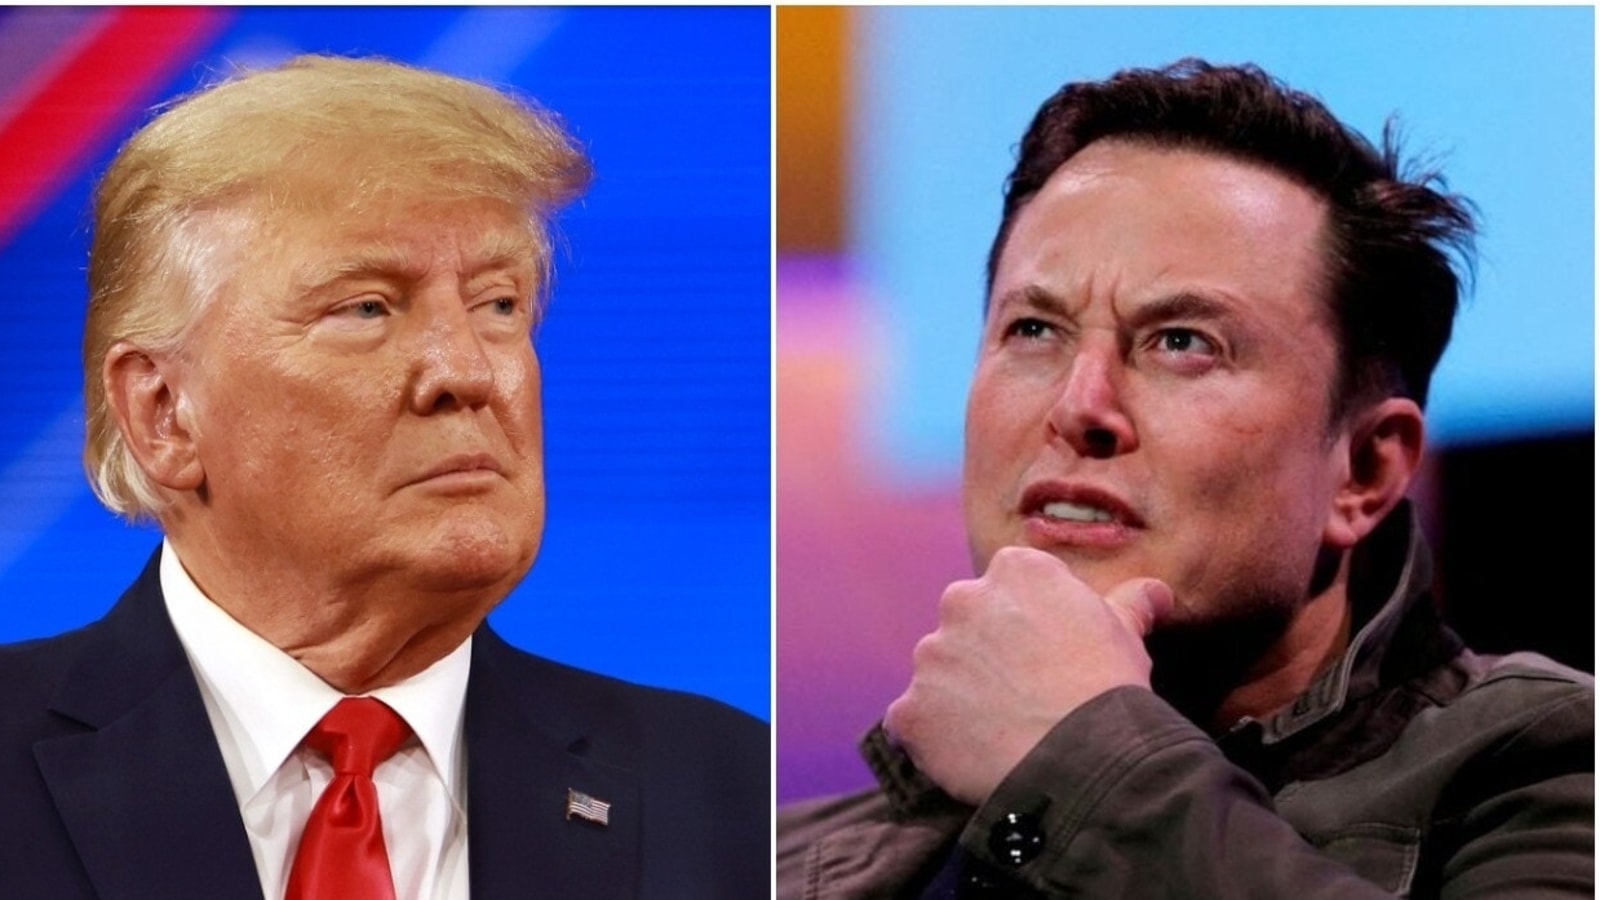 Elon Musk backed Trump’s political committee under investigation for possible Michigan law violations